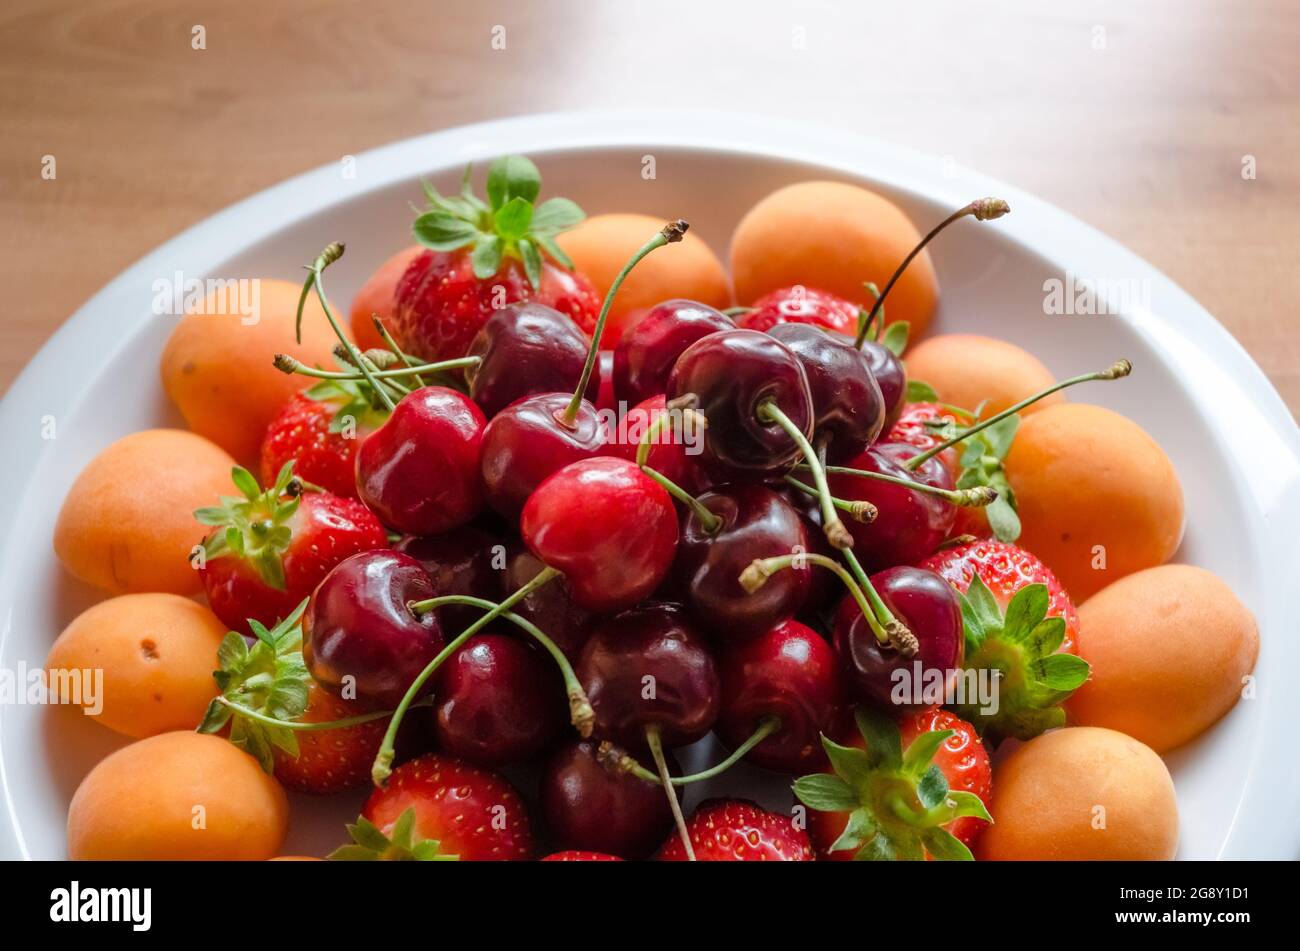 Friuts on a white plate with cherries, strawberries and mirabelle plums Stock Photo